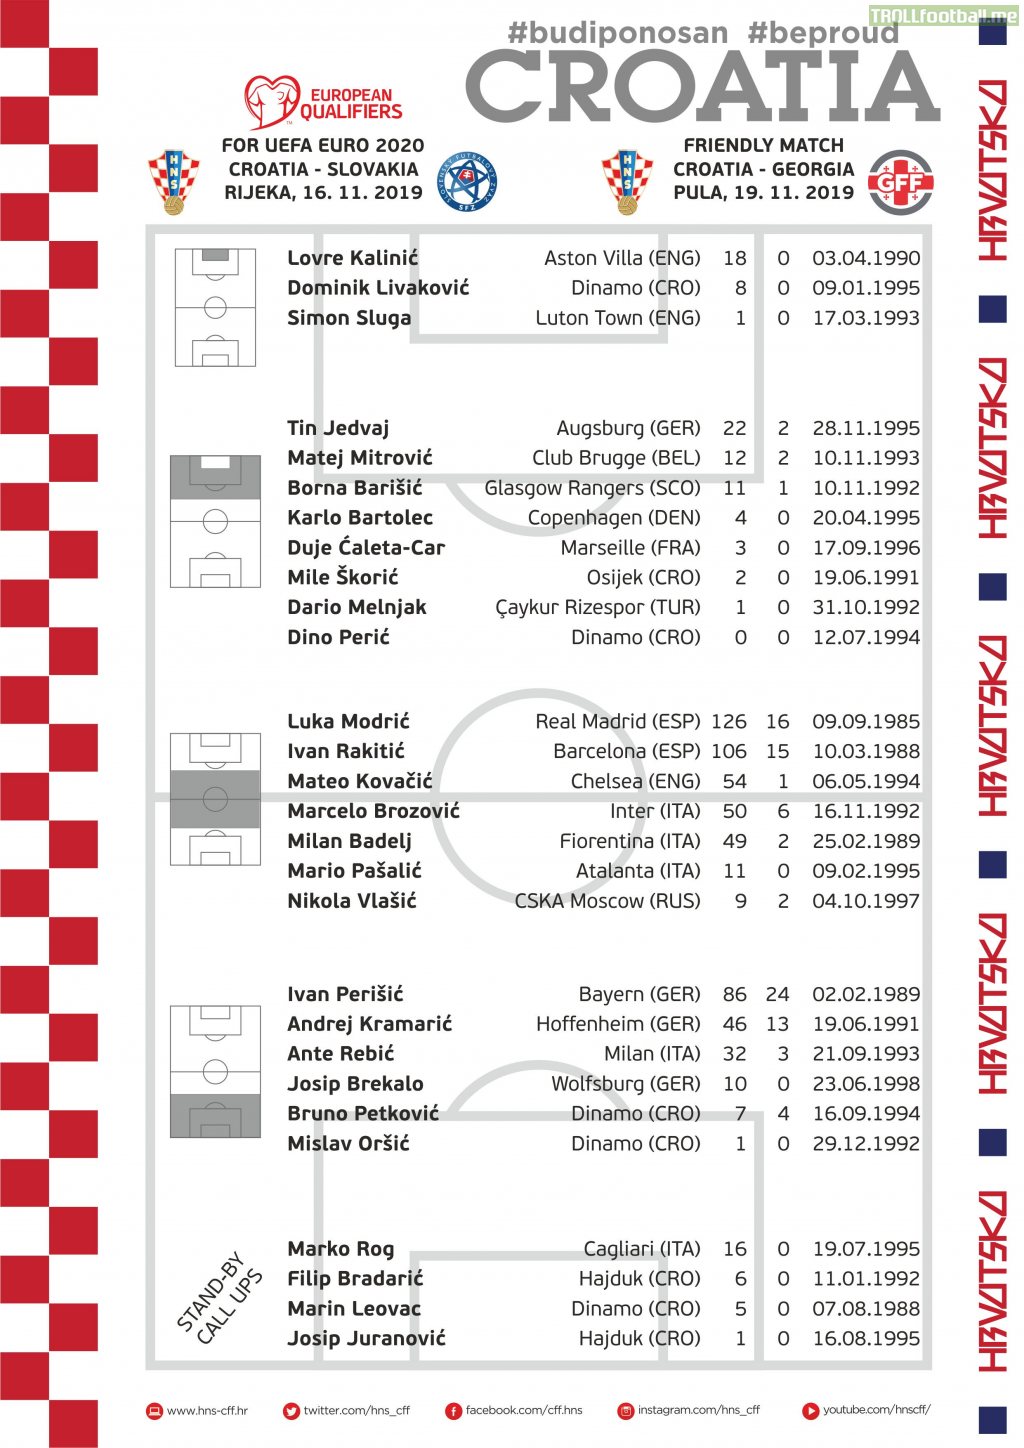 Croatia squad for the upcoming fixtures with Slovakia and Georgia